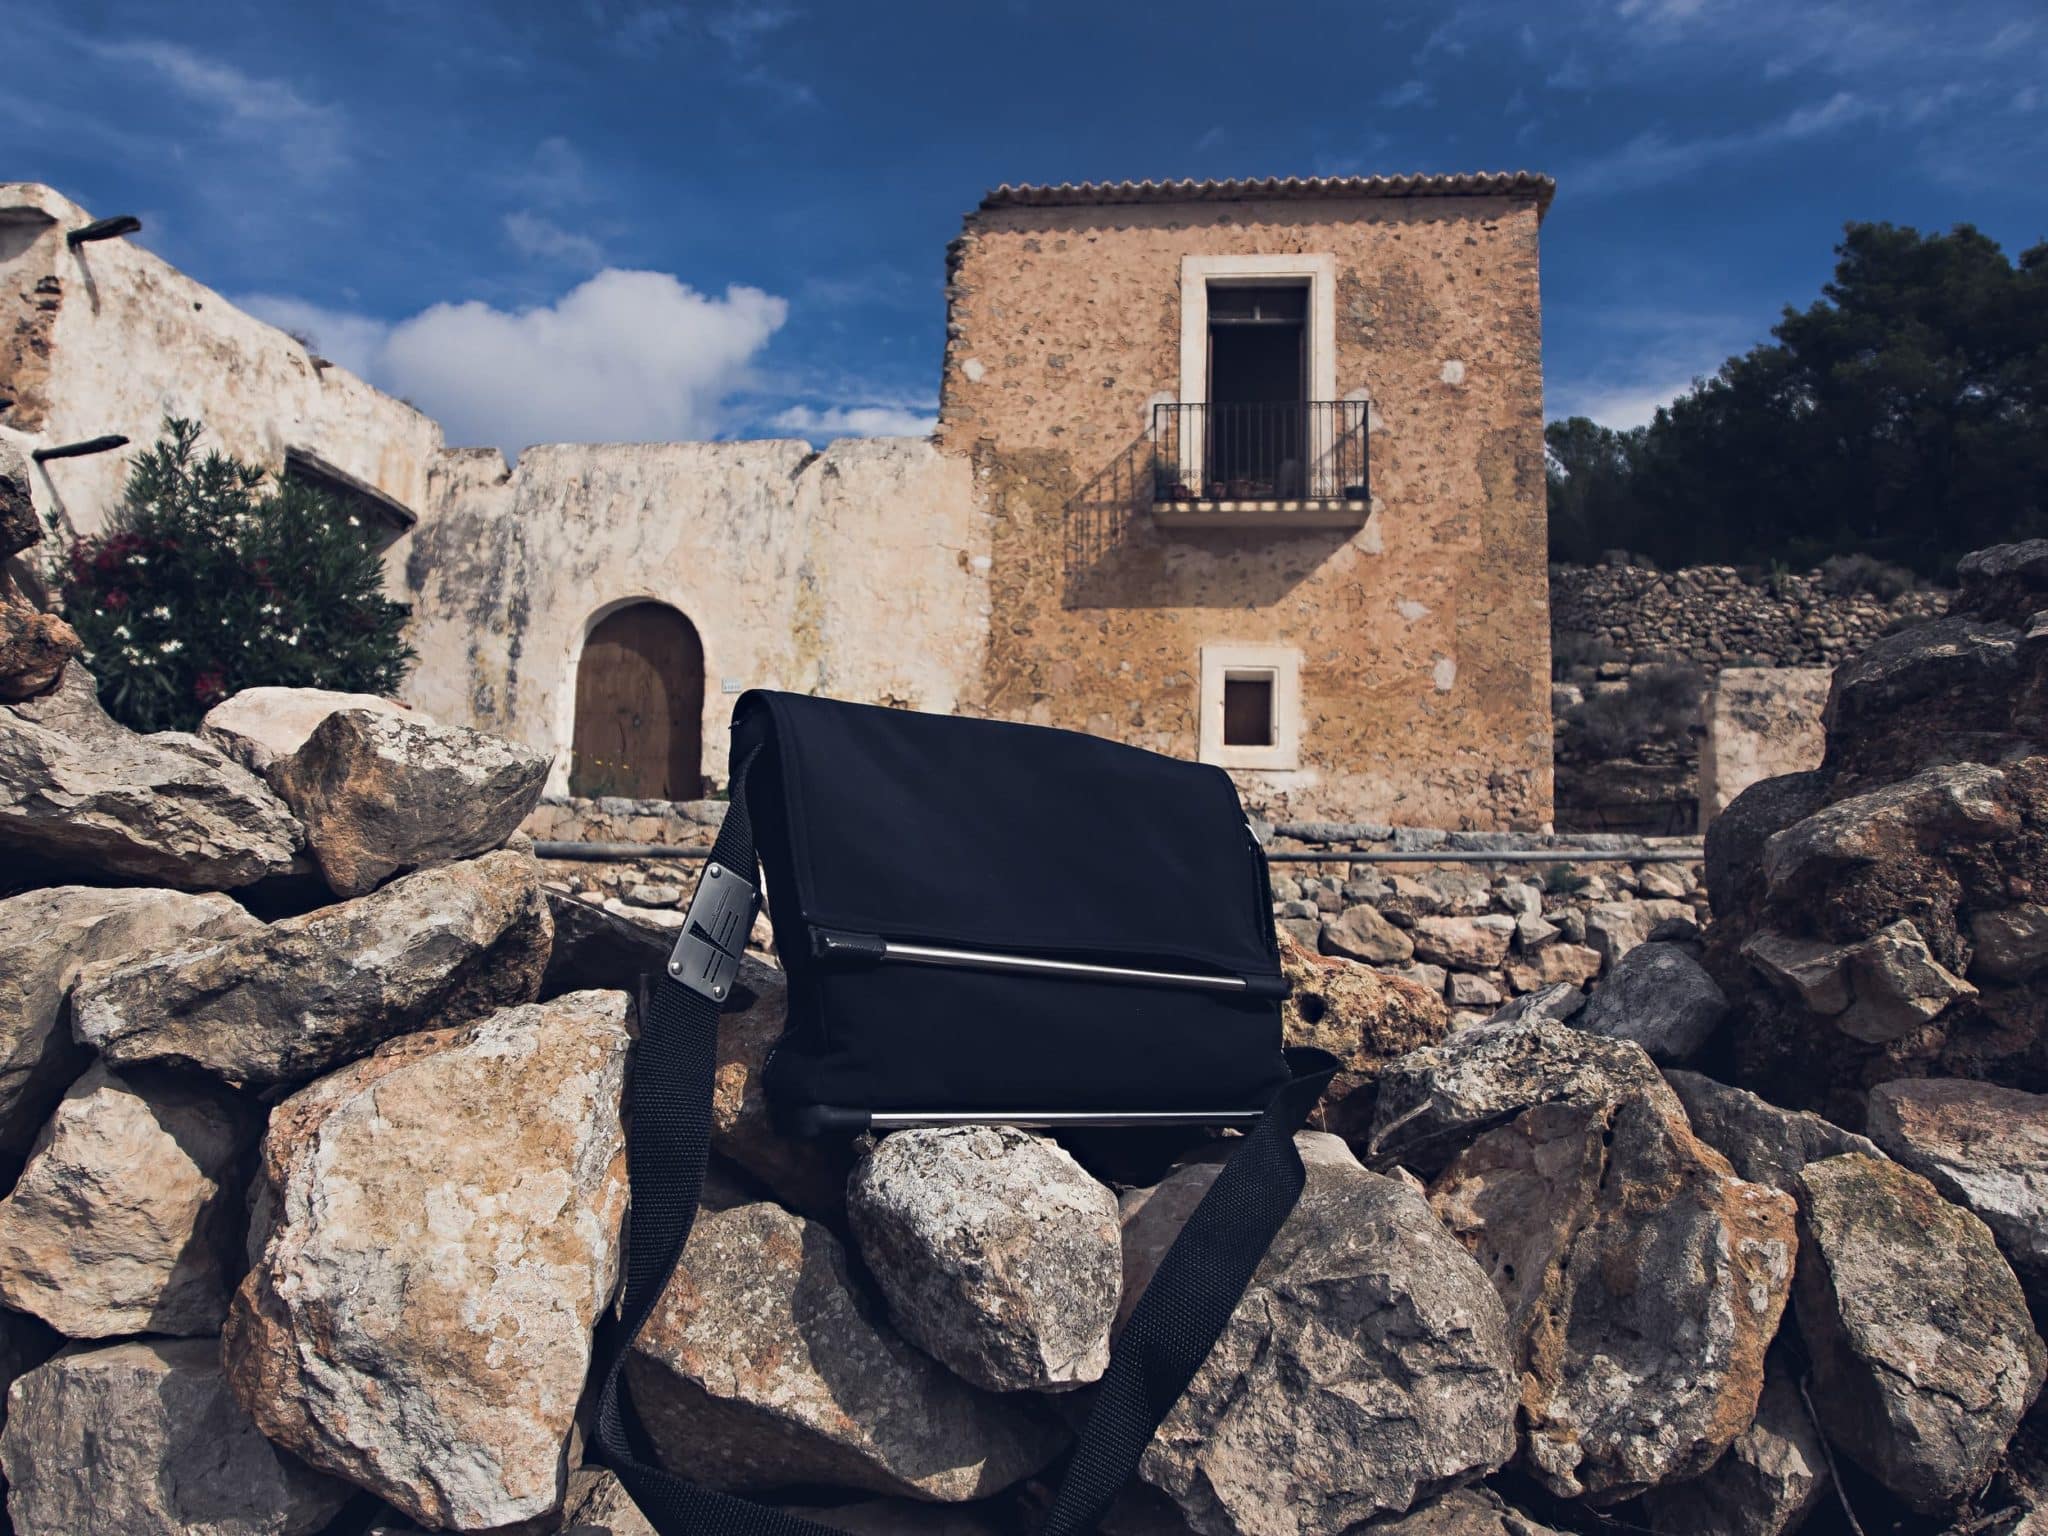 LiebJu Bags a travel love story - photographed by Holger Altgeld